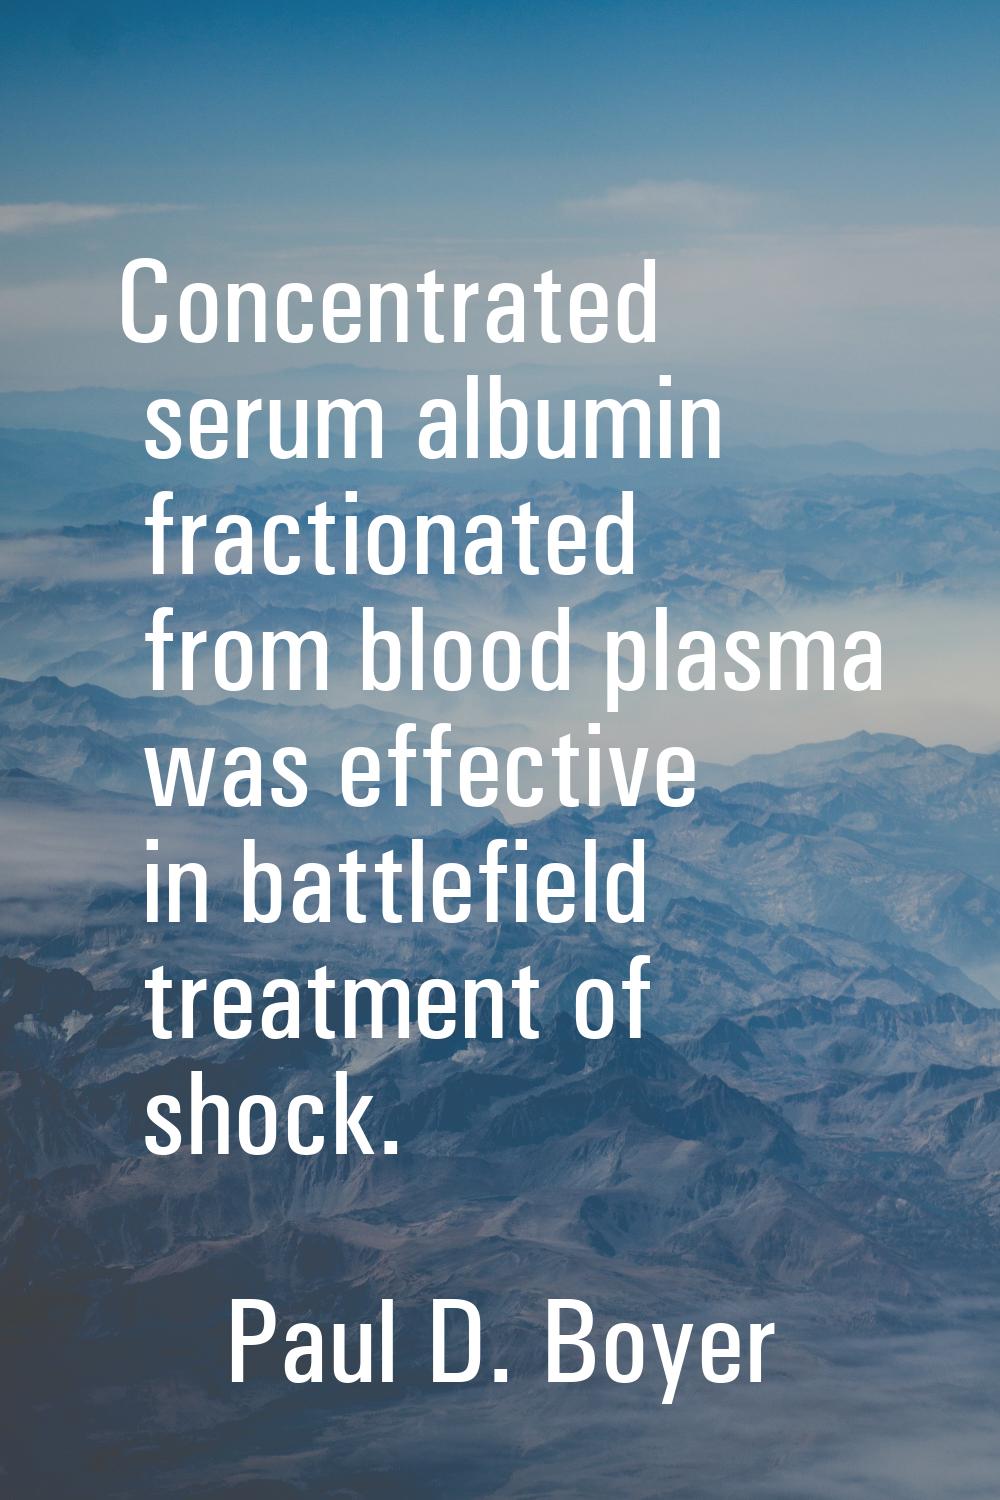 Concentrated serum albumin fractionated from blood plasma was effective in battlefield treatment of